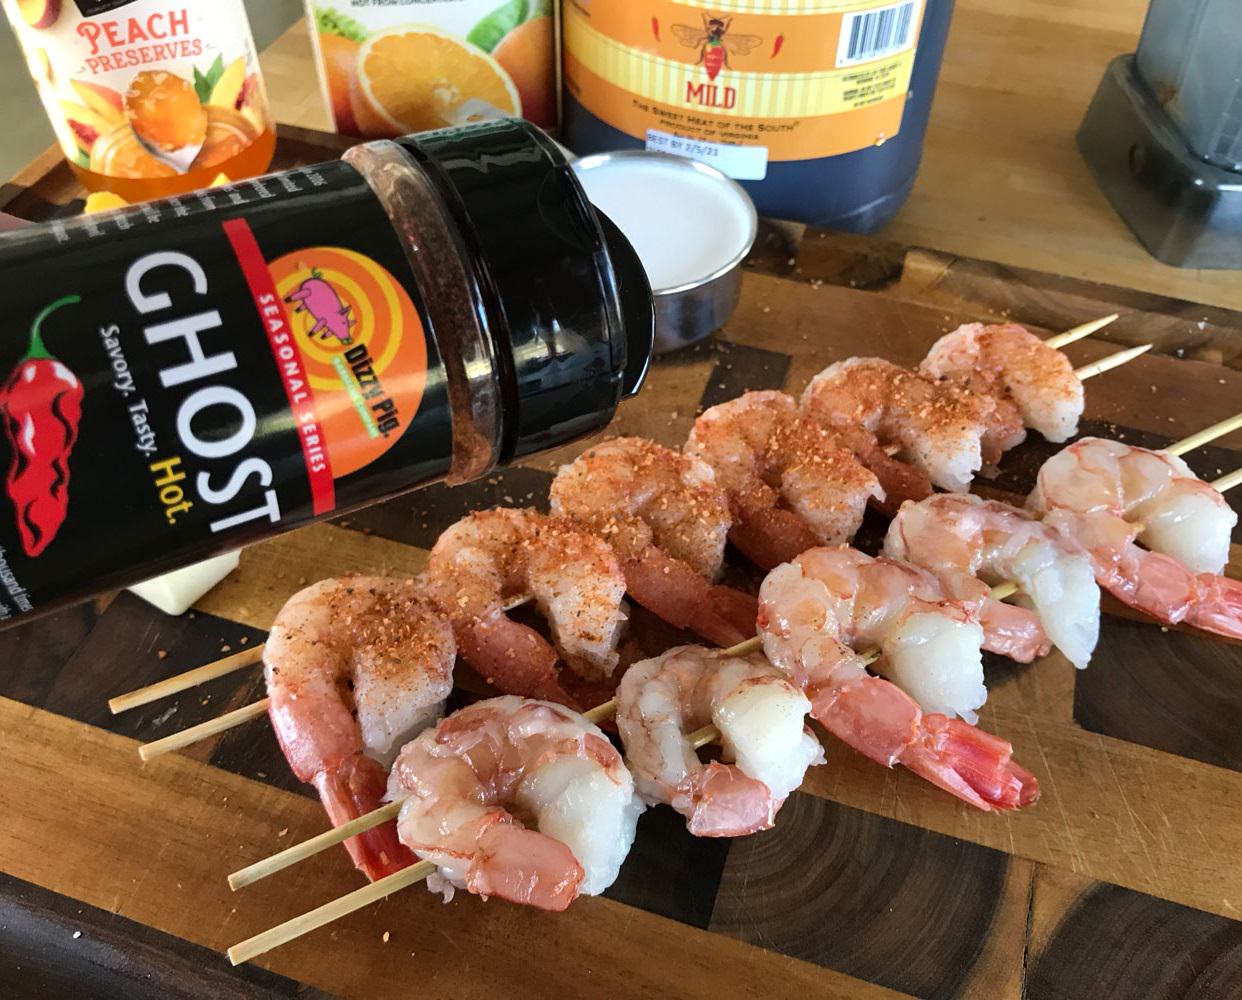 Thread the shrimp onto double skewers for ease of handling. Season shrimp with a coating of Dizzy Pig Ghost seasoning